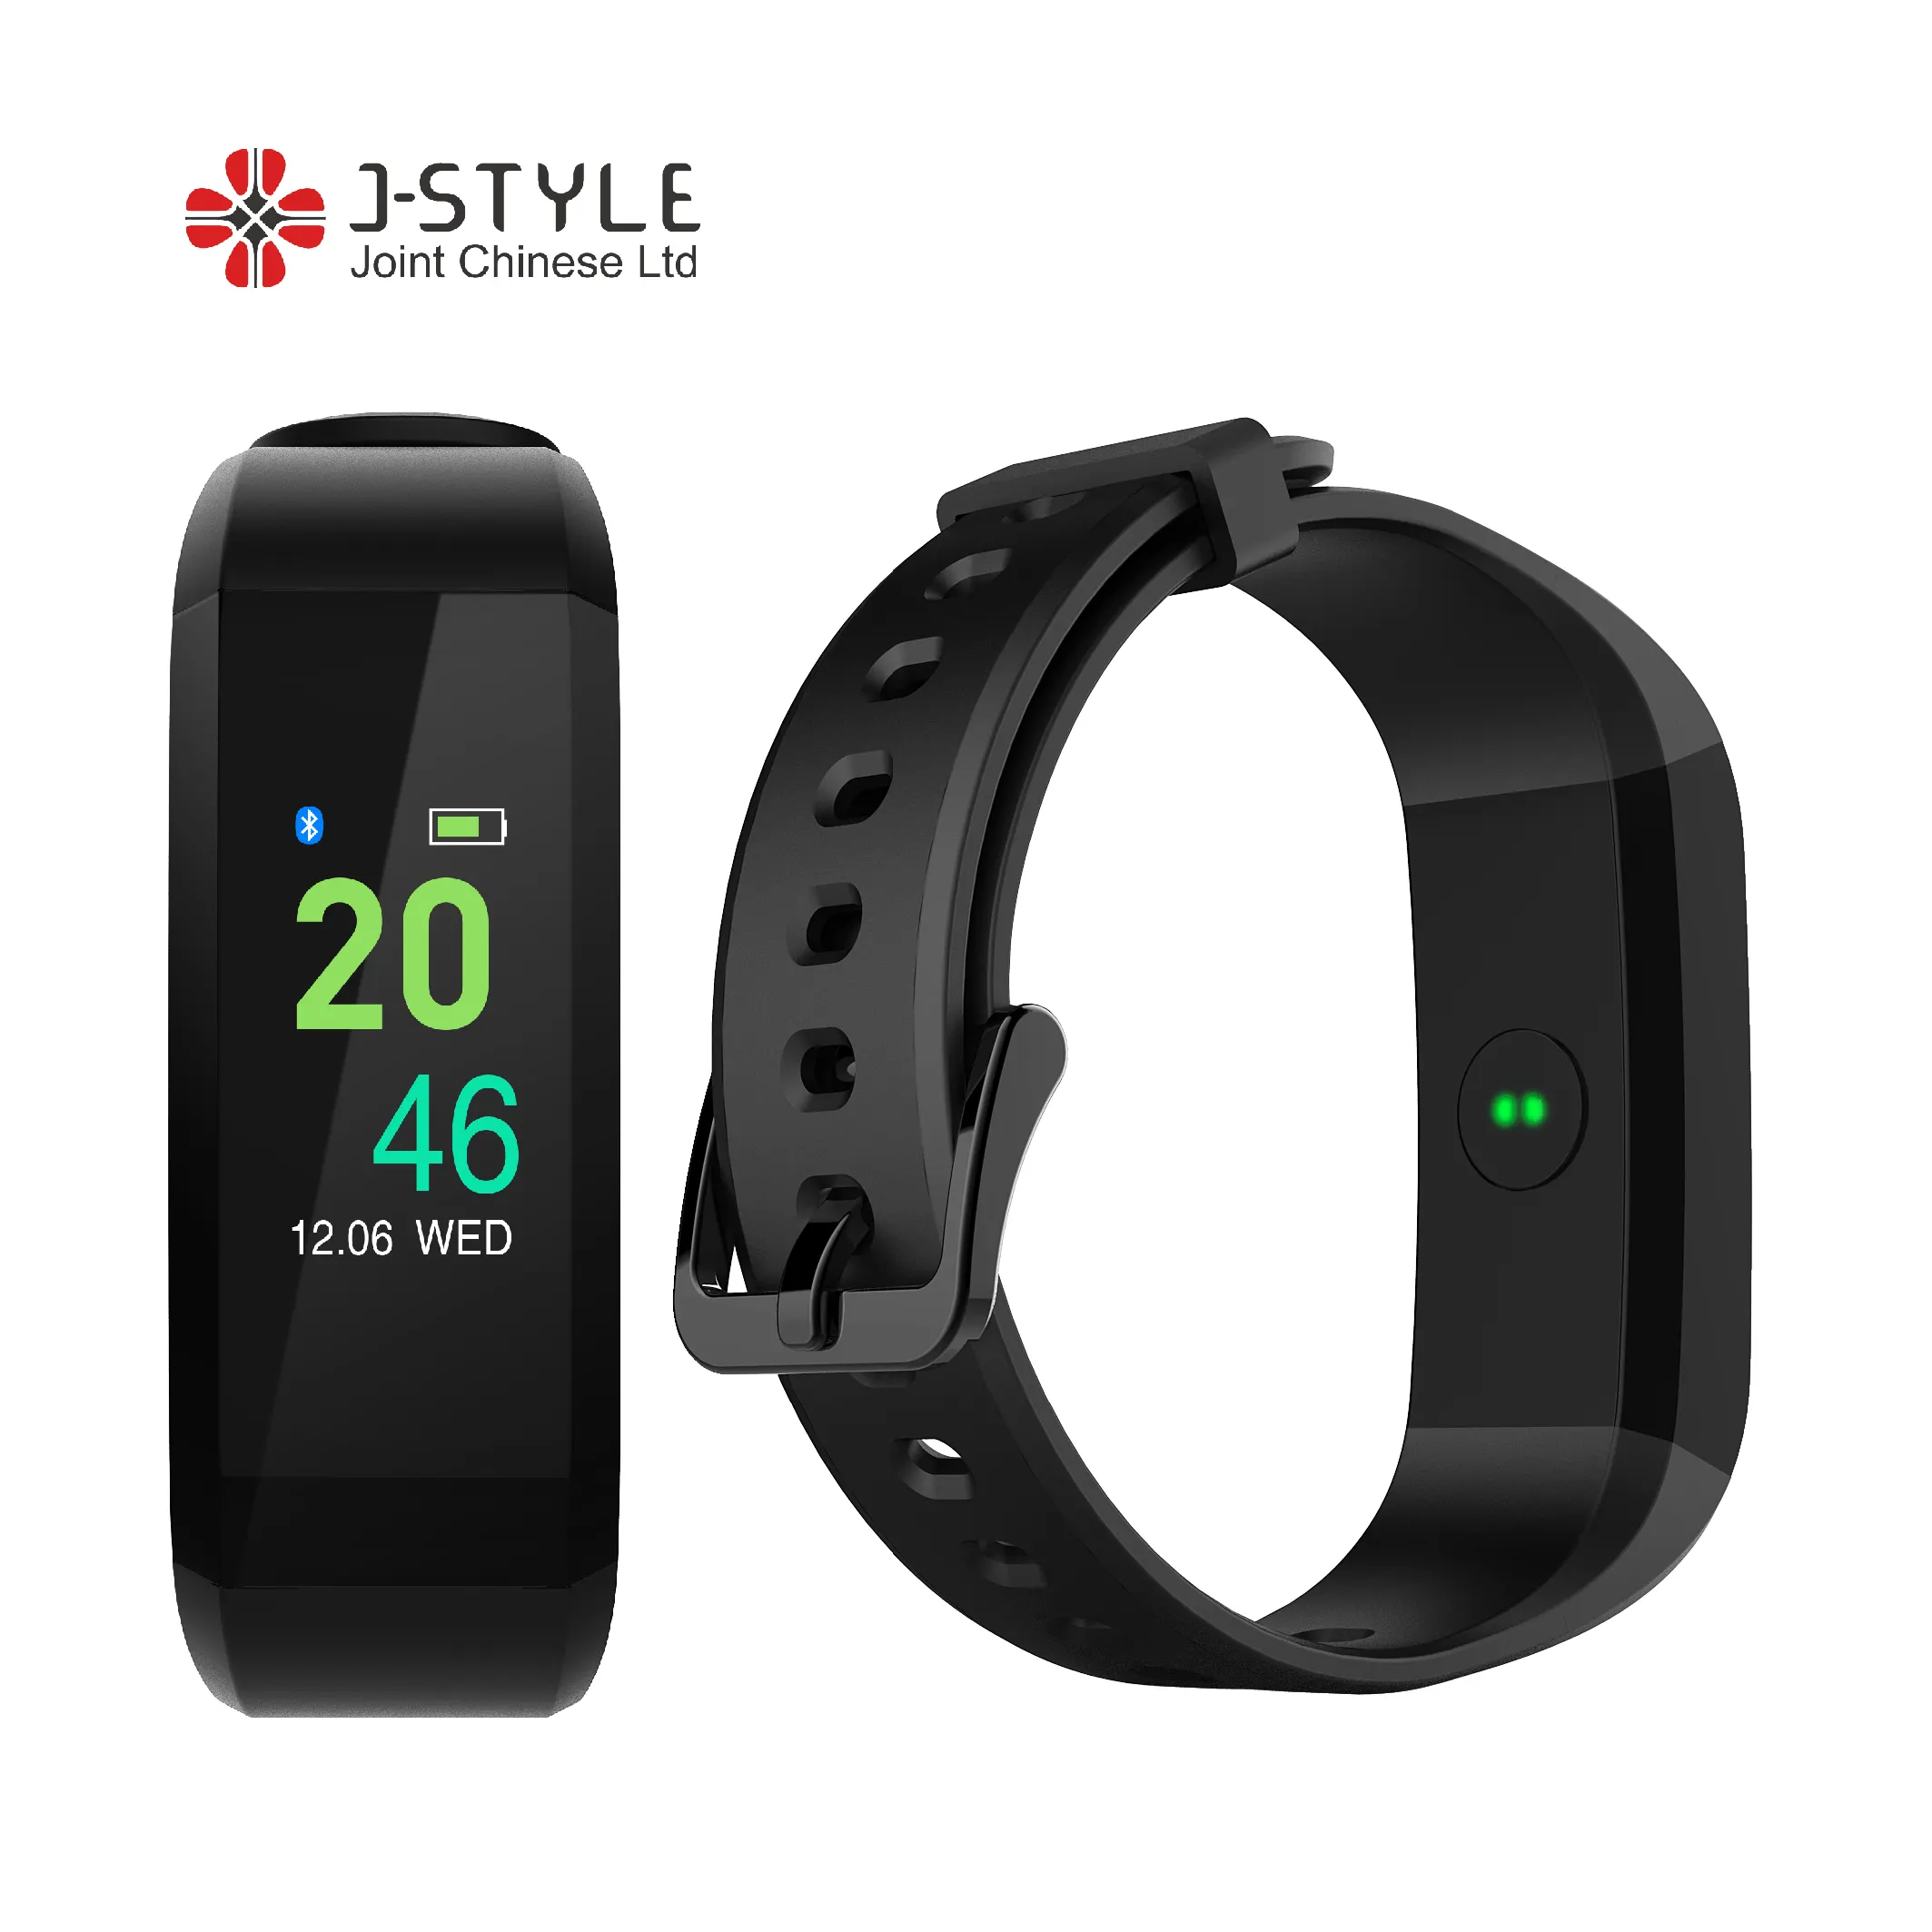 J-Style 1810 Bluetooth Smart Watch Bracelet Heart Rate Fitness Tracker Sleep Monitor with 0.96 TFT Color Display